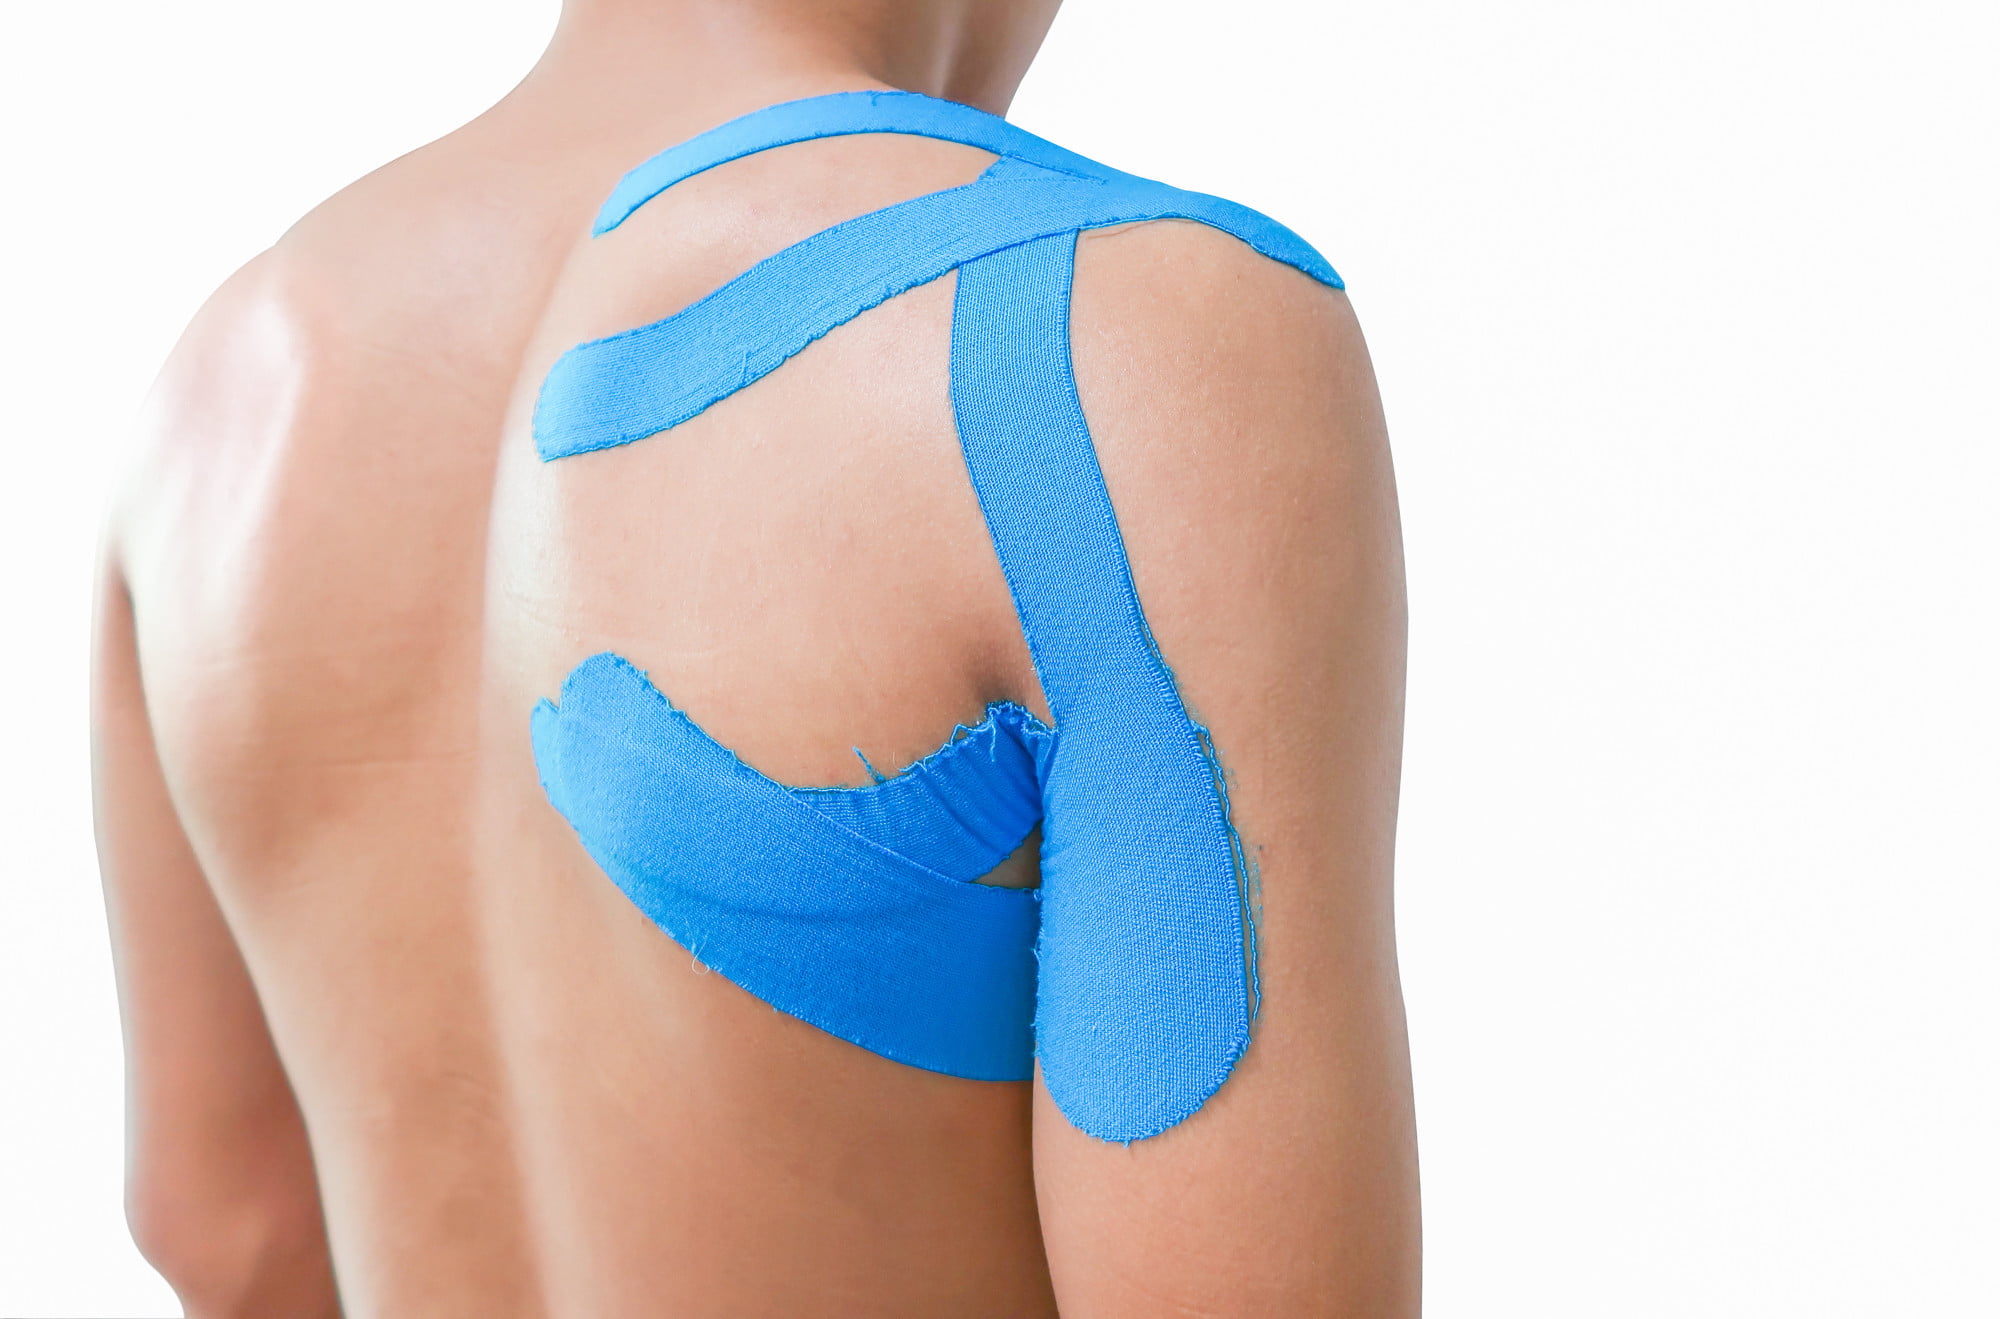 Has your doctor recommended kinesiology taping? Read on to find out what the benefits of this treatment could be for your health.